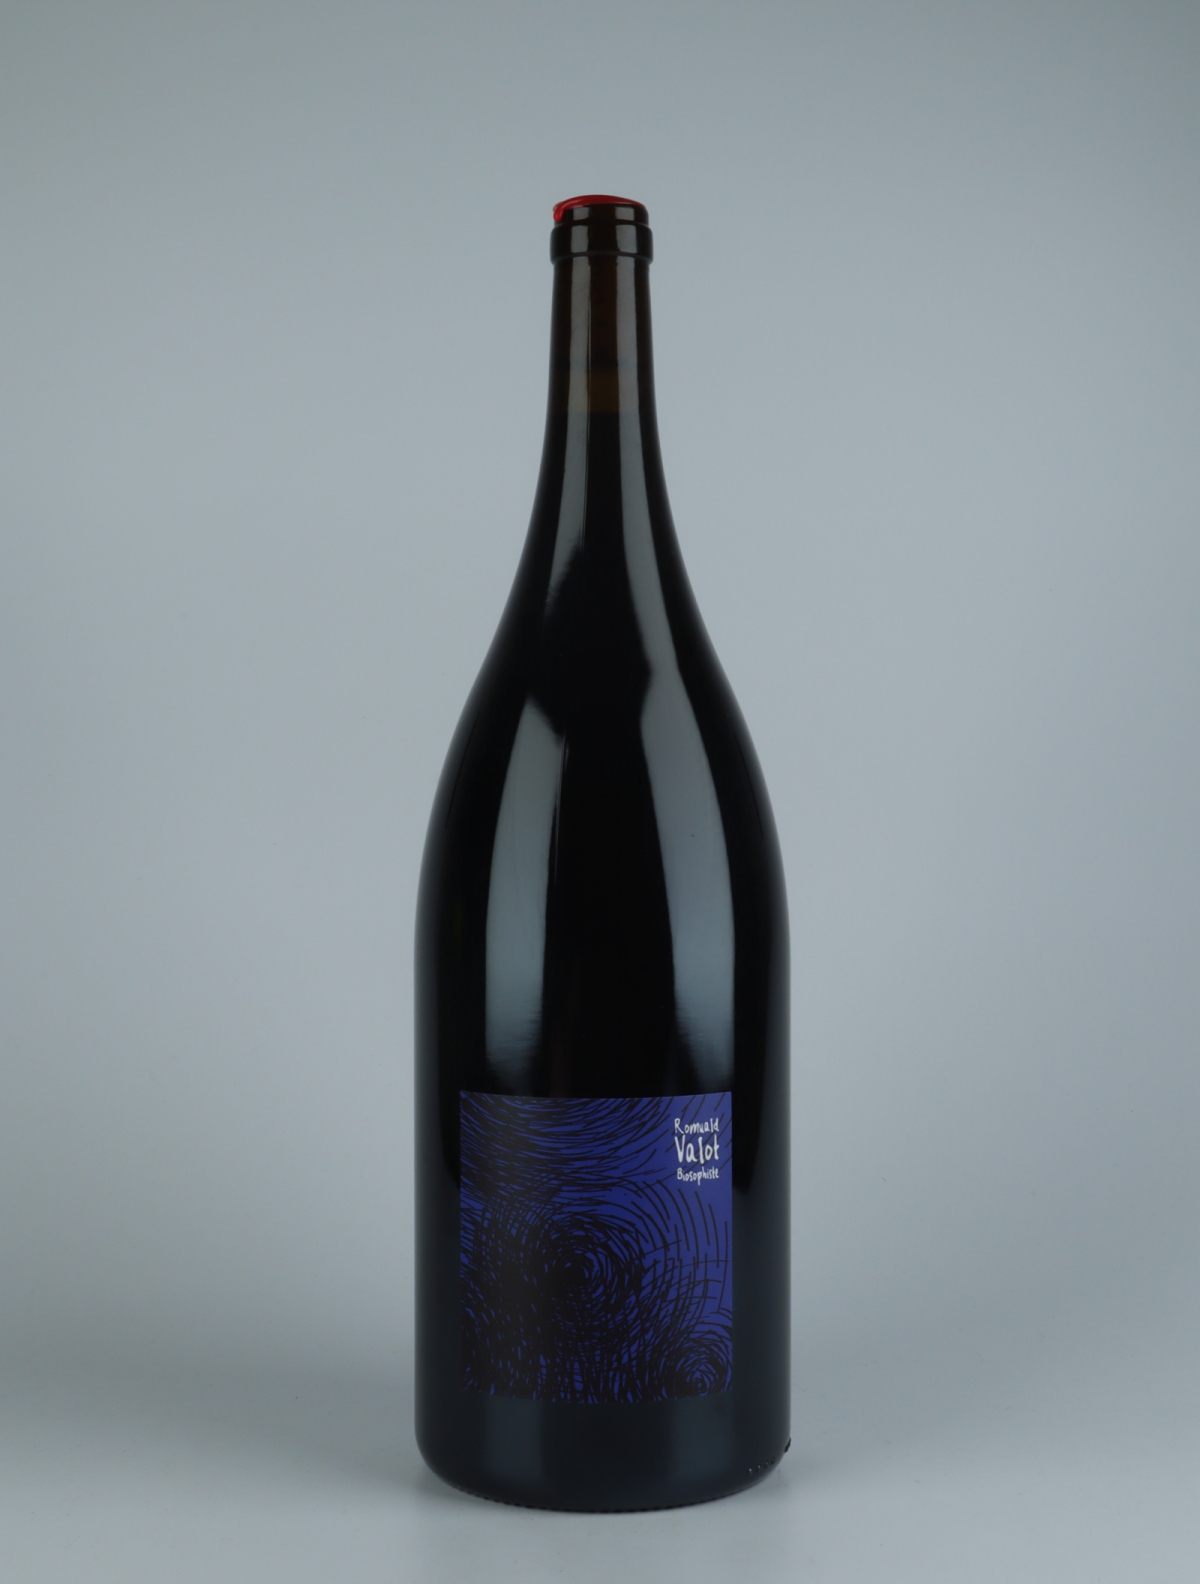 A bottle 2020 Côte de Brouilly Red wine from , Beaujolais in France